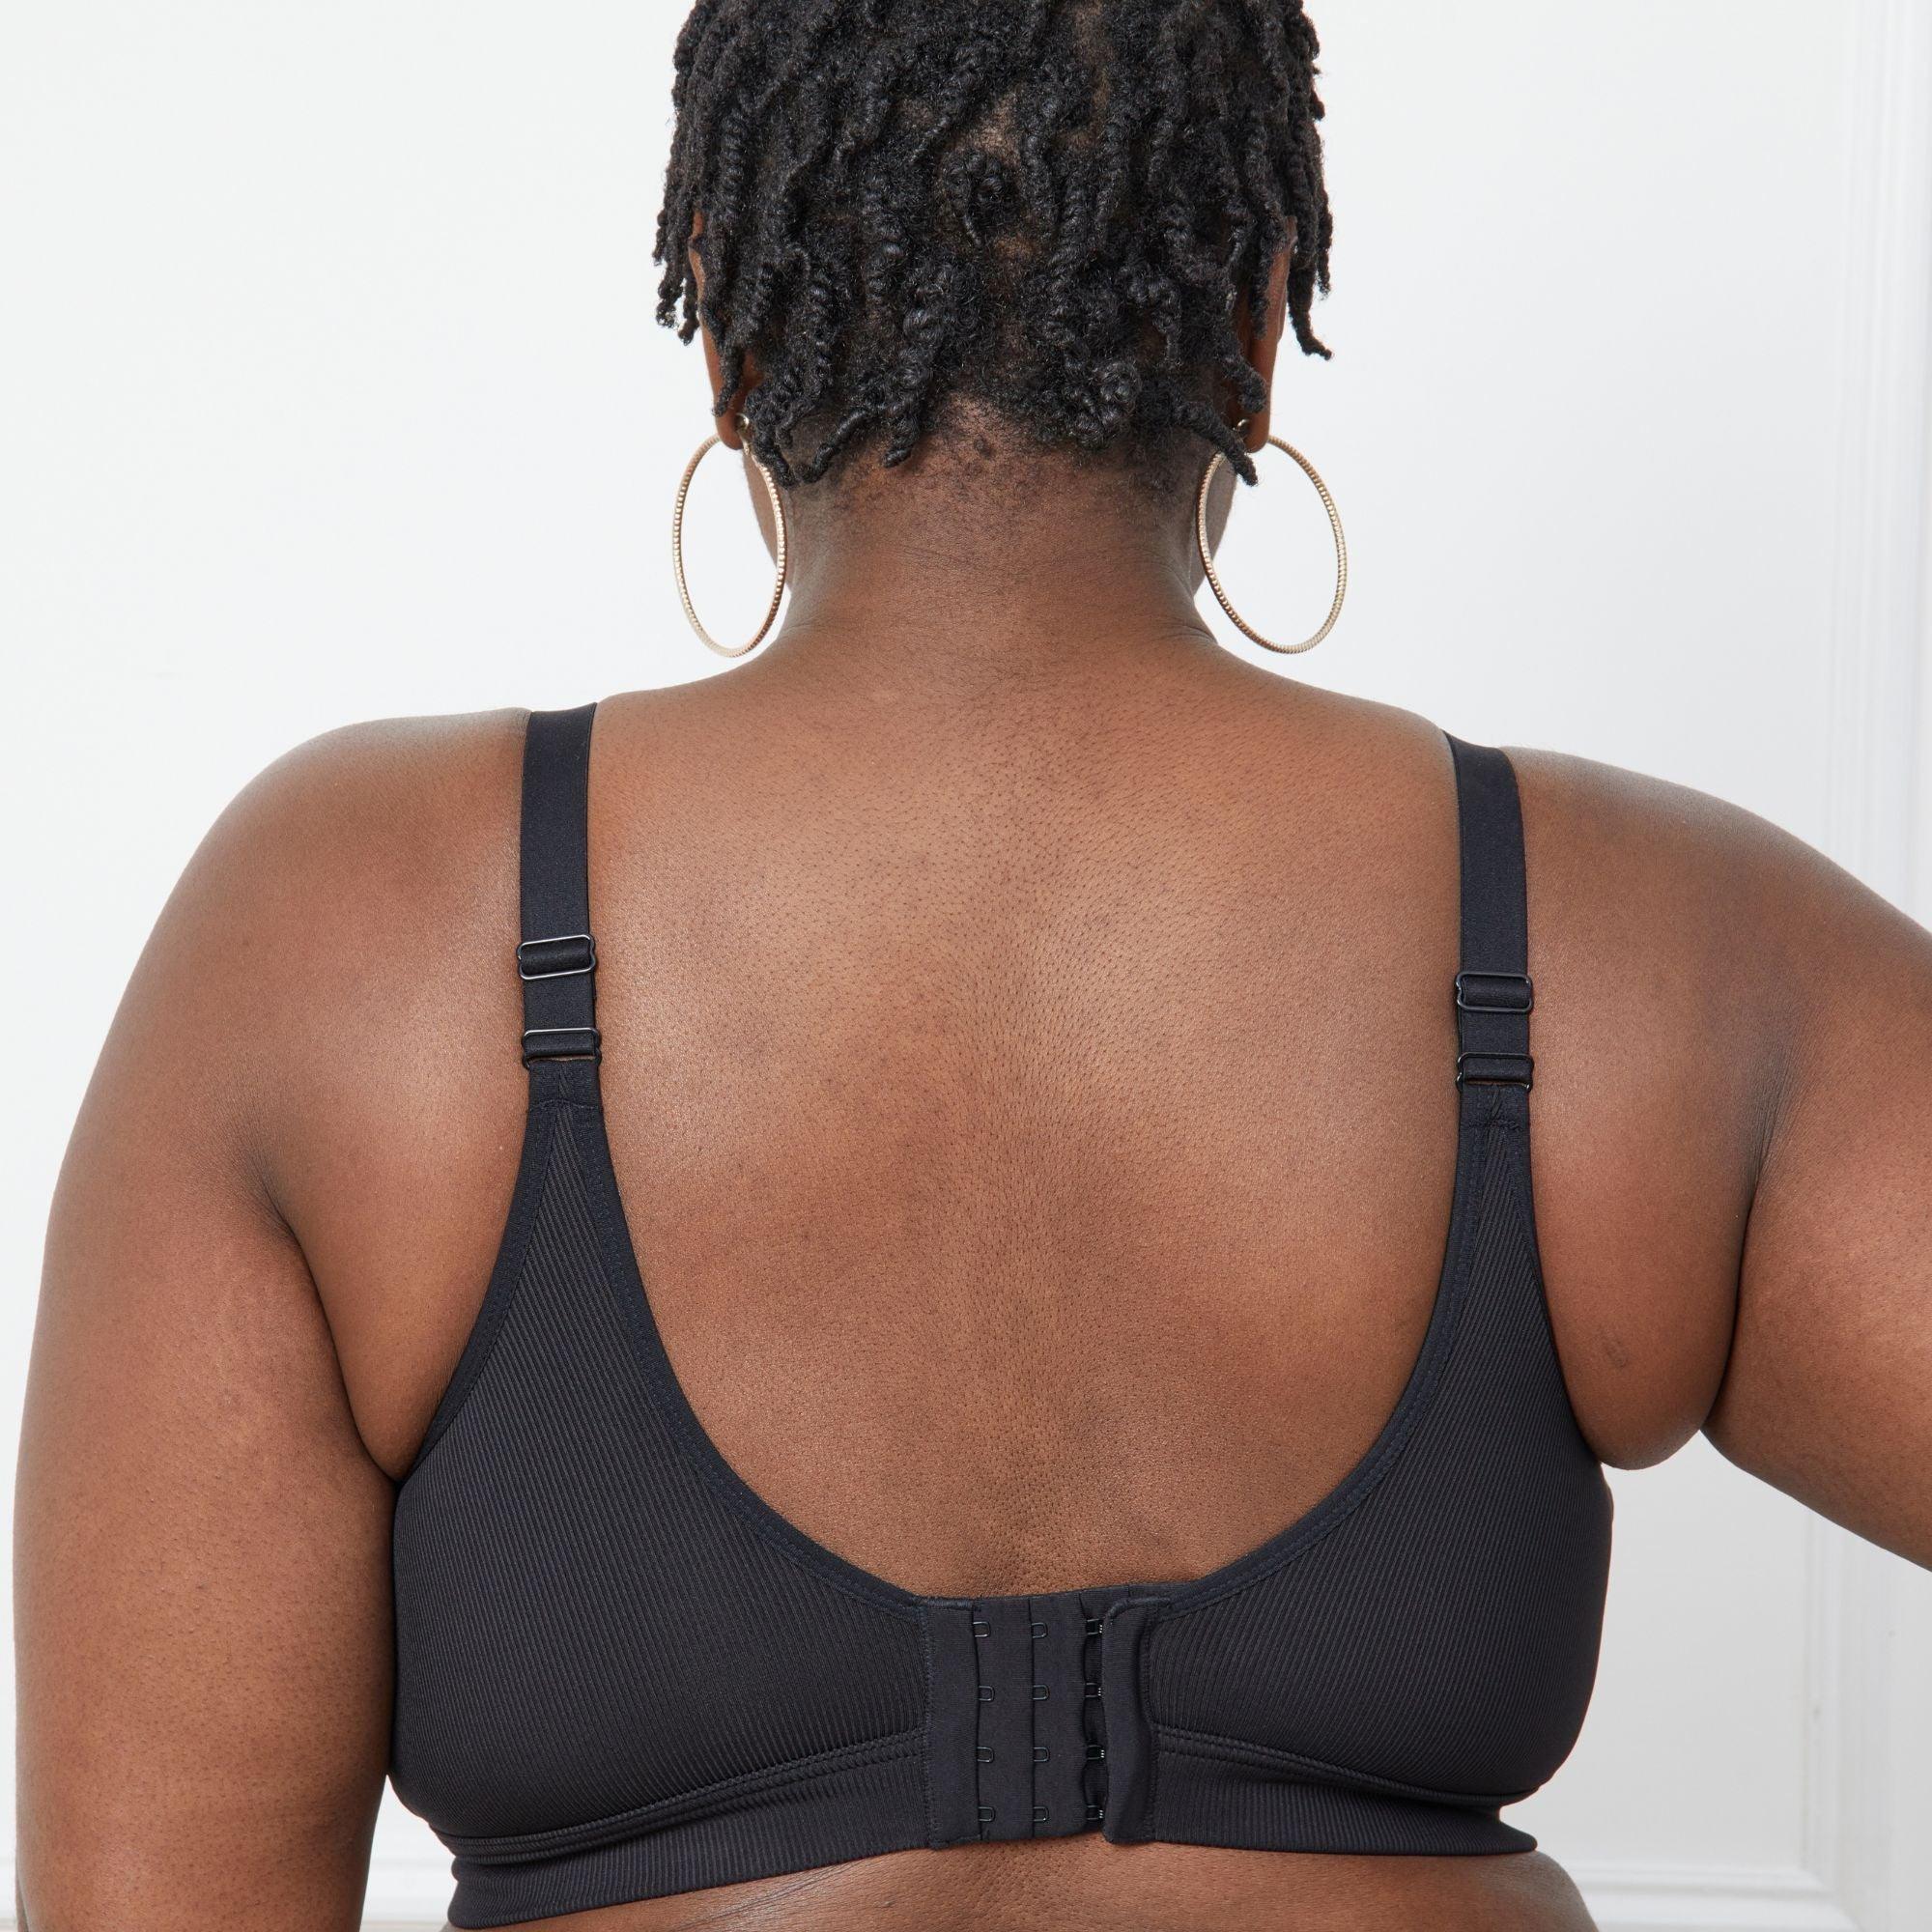 Black is timeless - New #9two5fit bras and leggings feel like